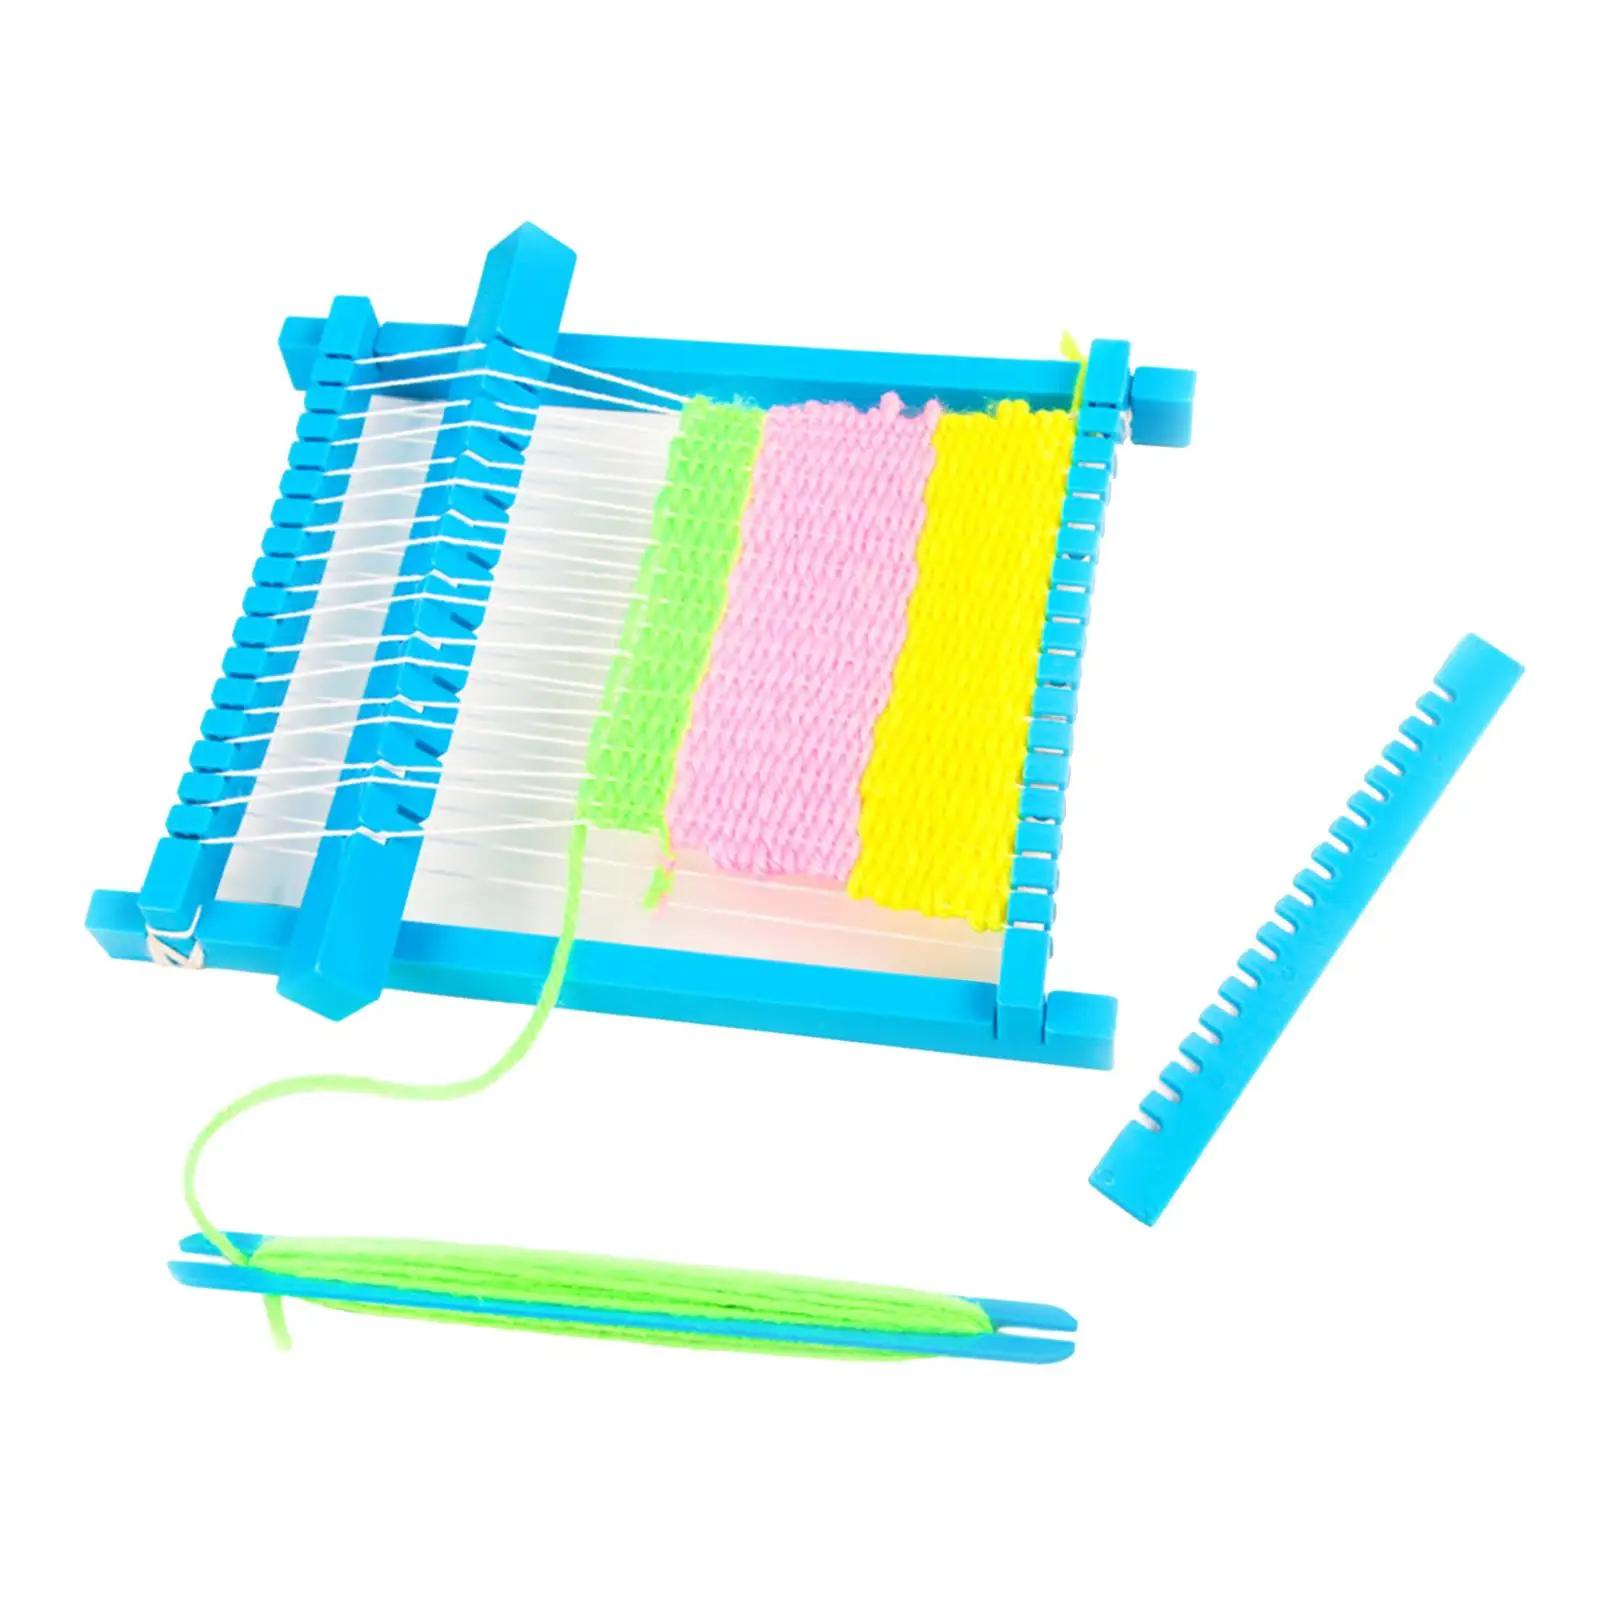 

1 Set Weaving Loom DIY Handmade Creative with Accs Multifunctional Craft Sewing Woven Machine Toy for Children Kids Beginners